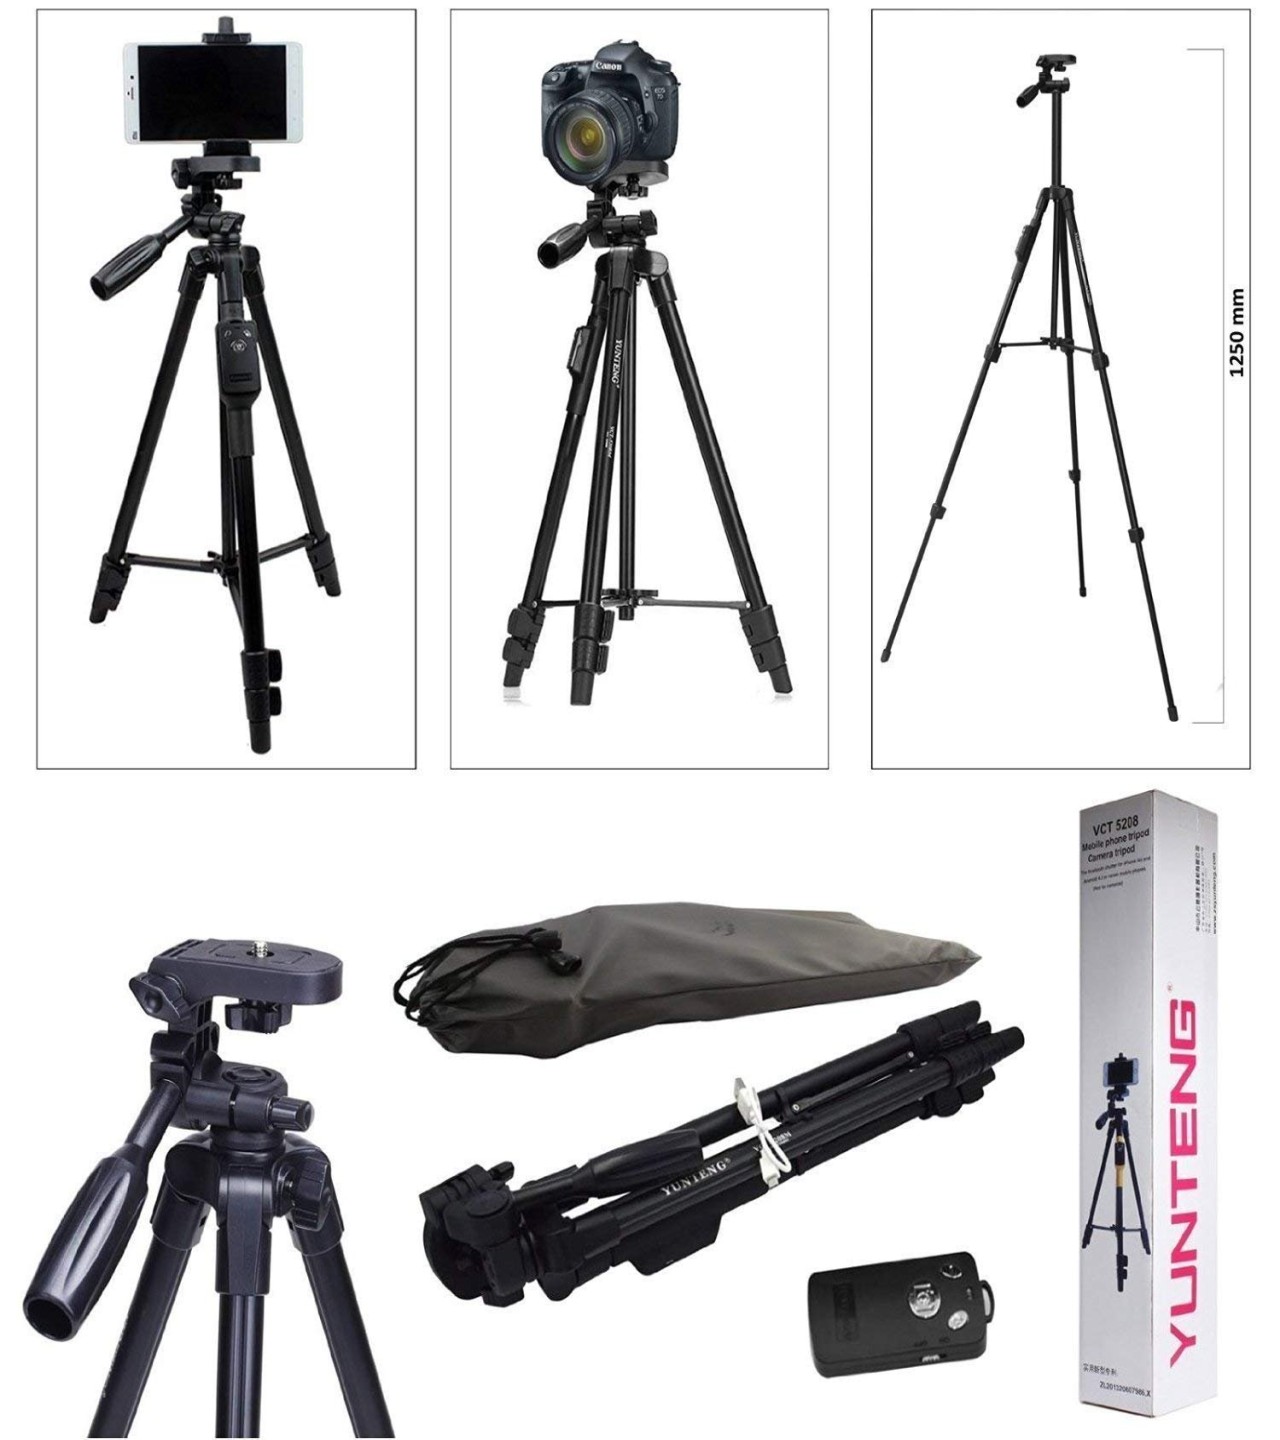 Selfie Video YUNTENG VCT 5208 RM Aluminum Tripod with 3-Way Head & Bluetooth Remote